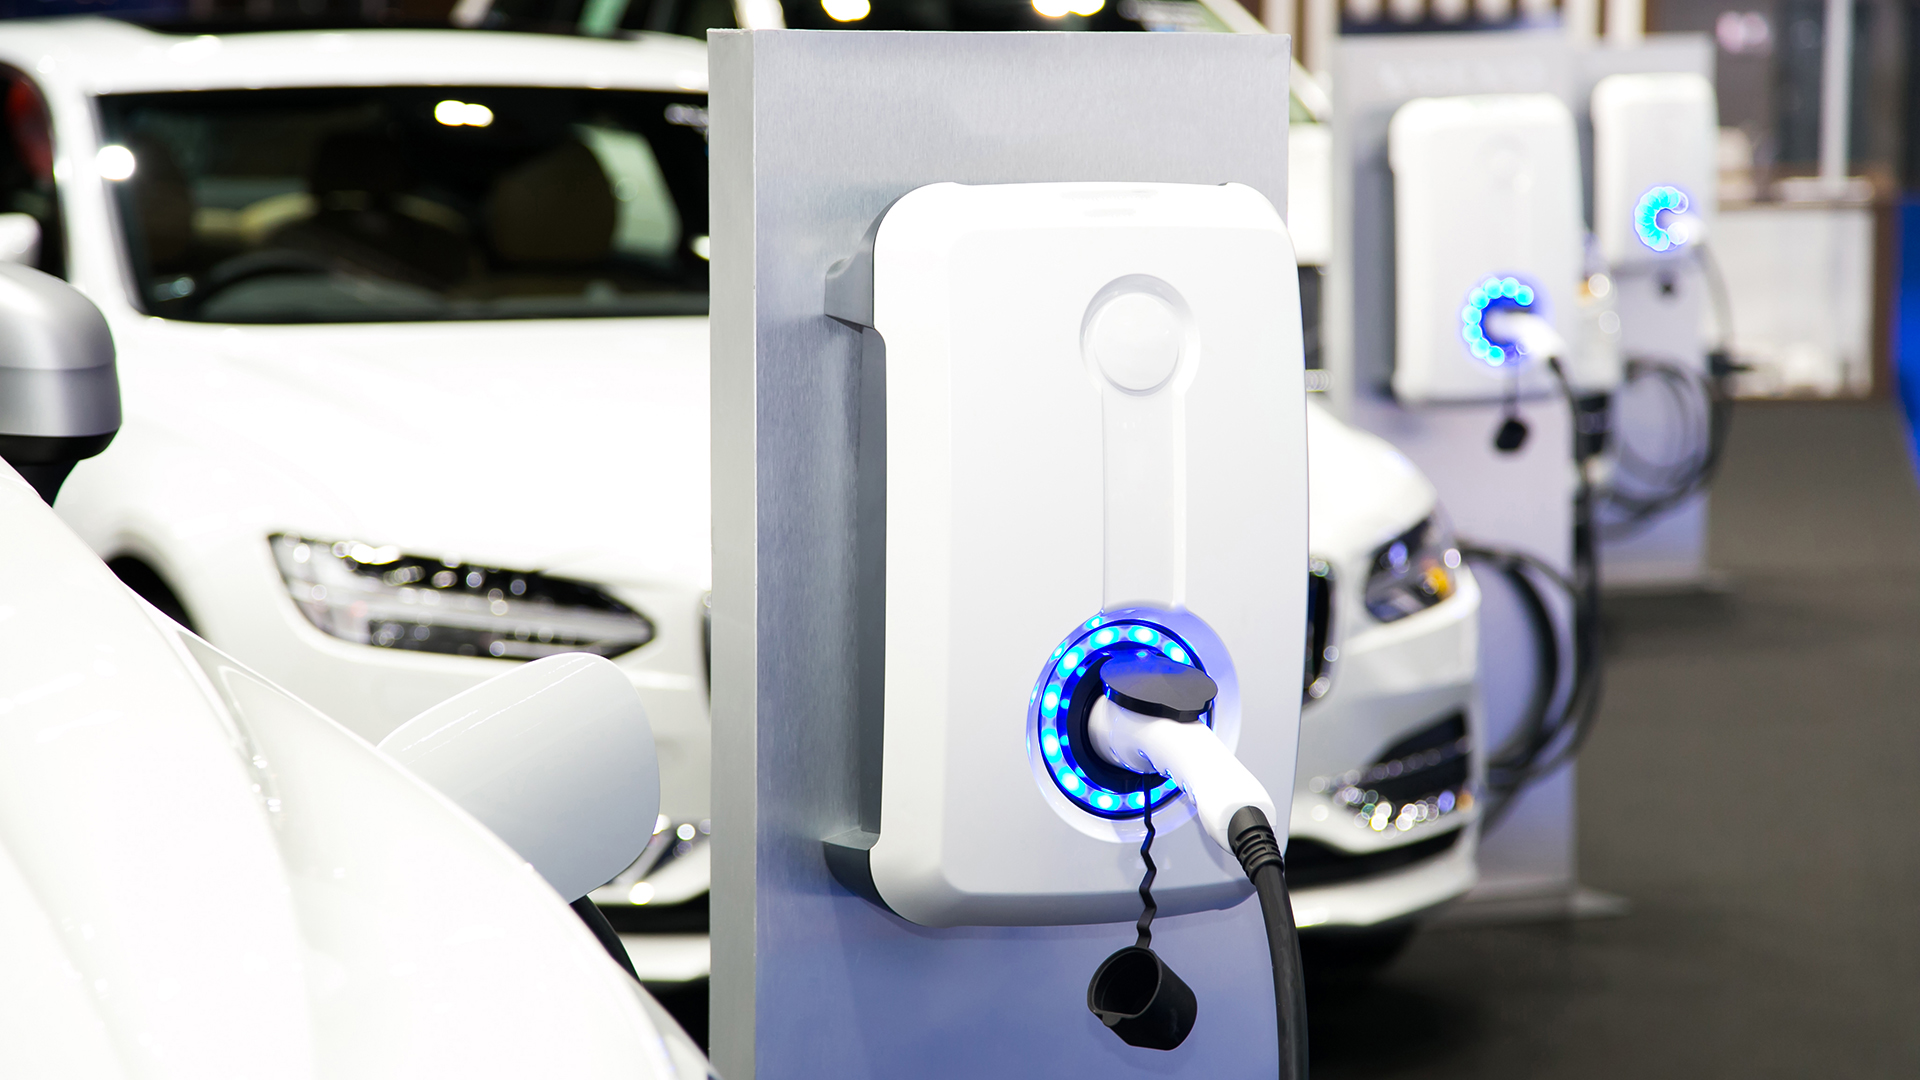 Top 30 electric vehicle supply equipment cities revealed in new report